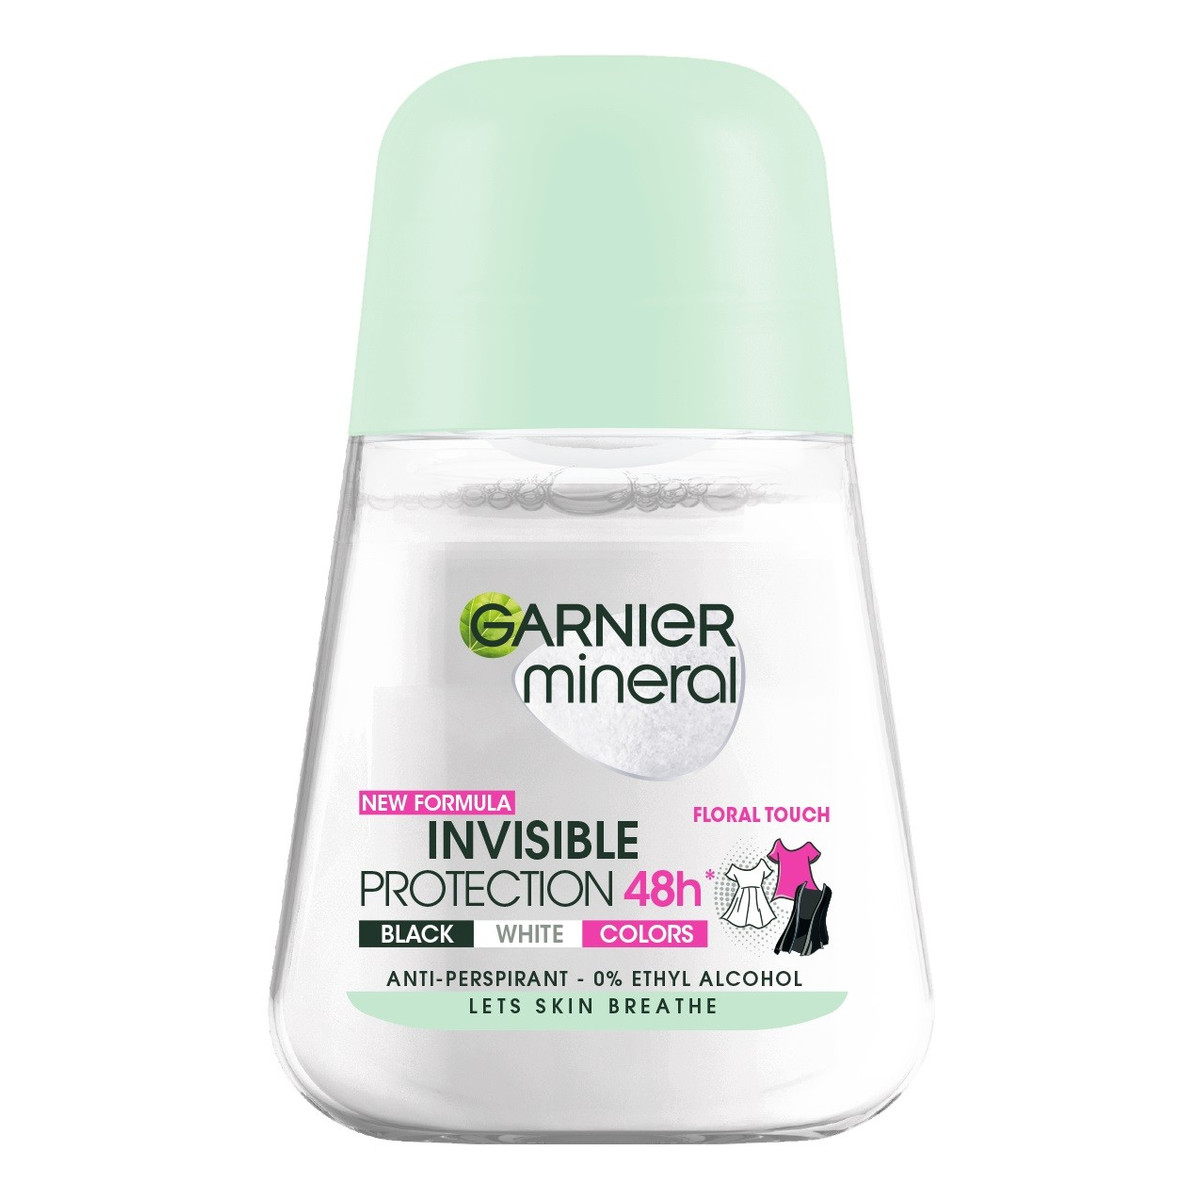 Garnier Mineral Dezodorant roll-on Invisible Protection 48h Floral Touch Black White Colors 50ml